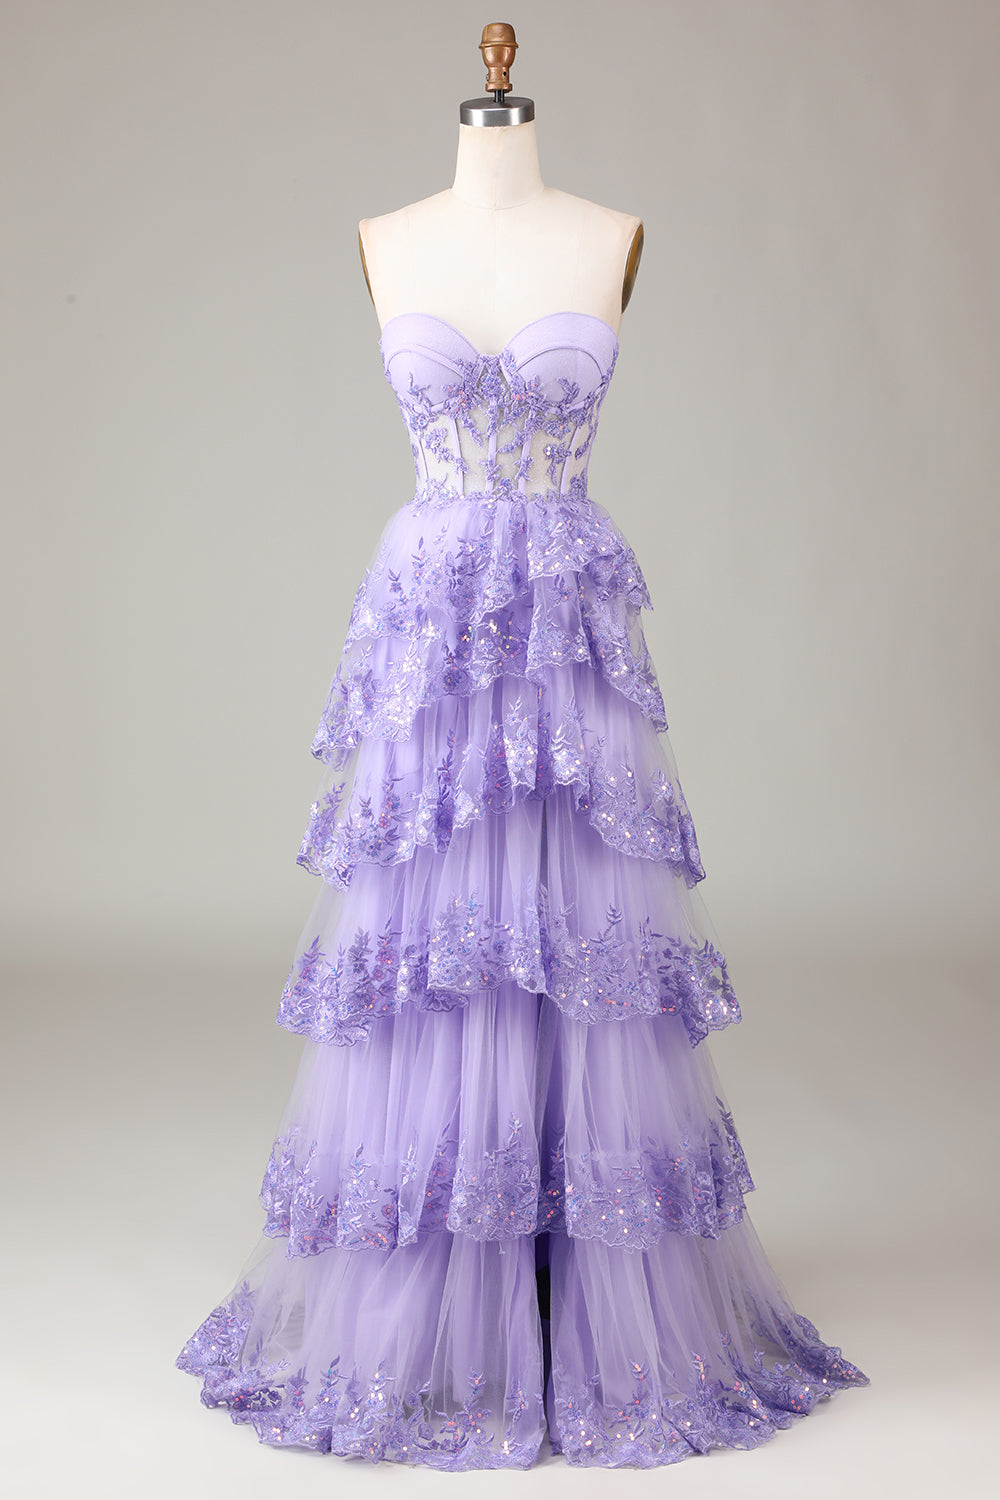 Eightree Sparkle Purple Tulle Evening Dresses Long A Line Sequined